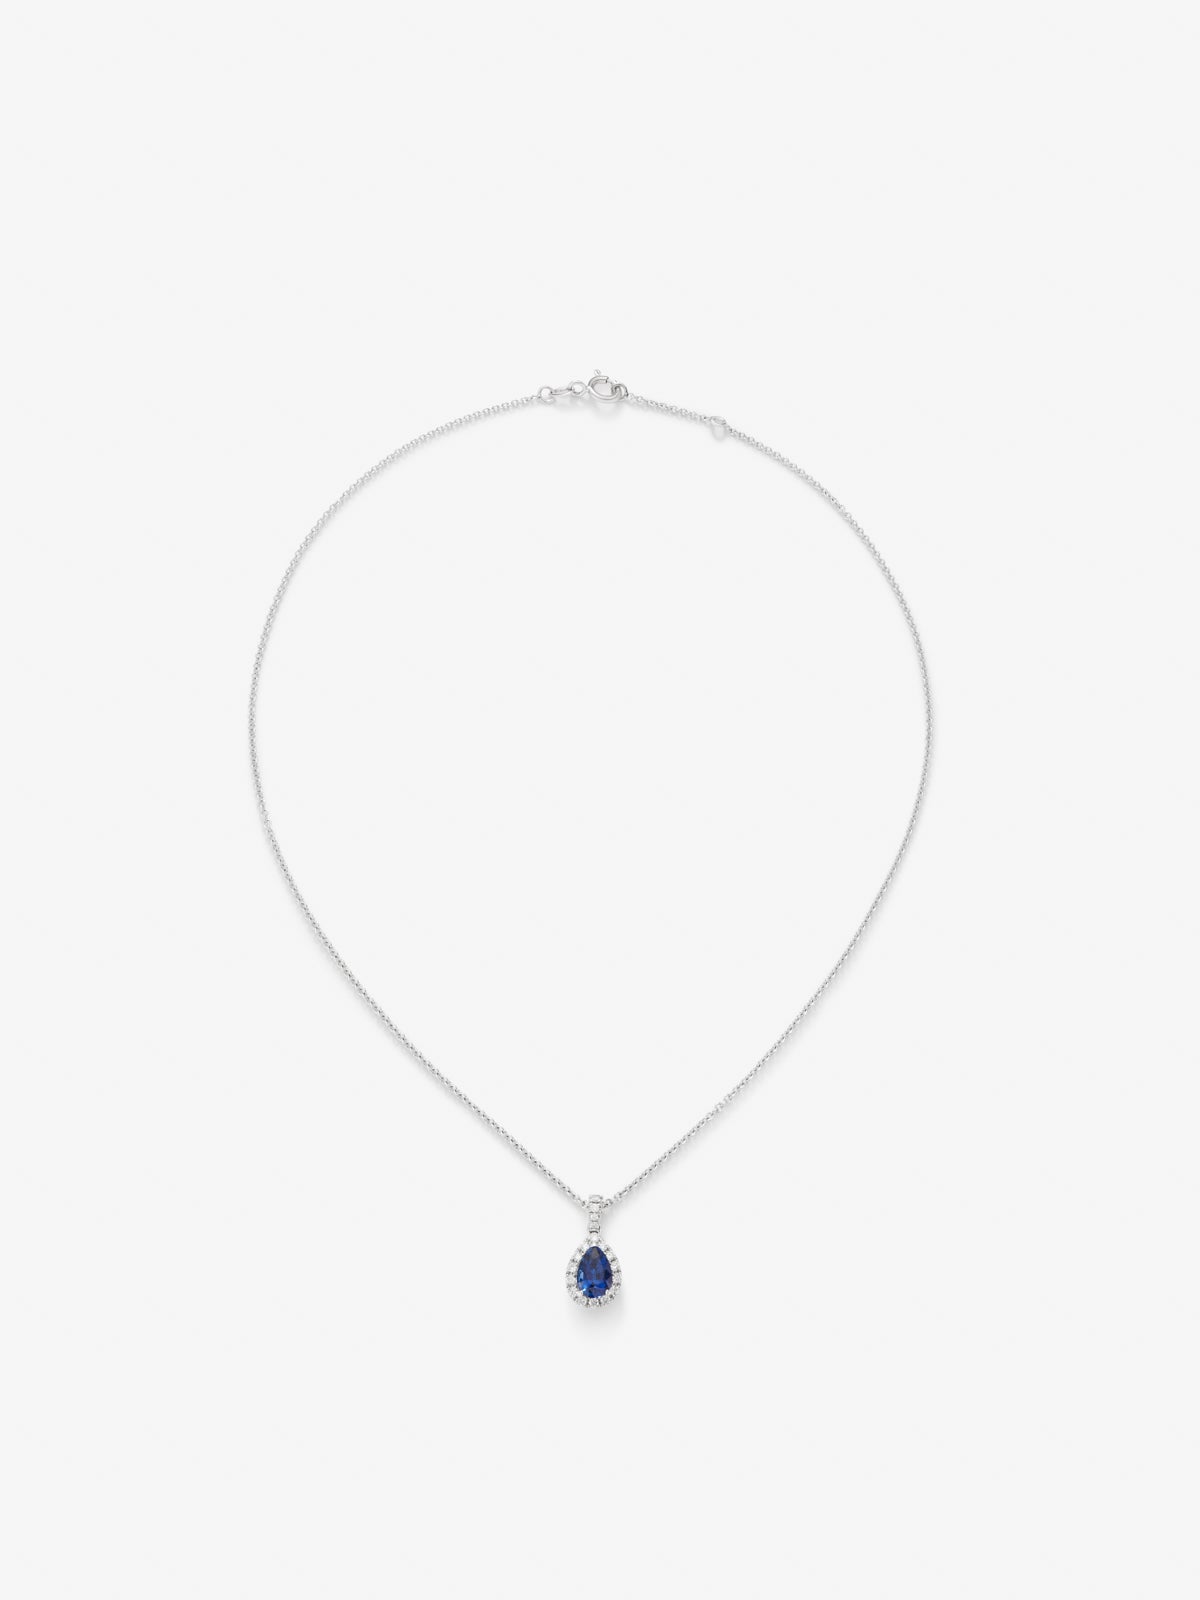 18K white gold pendant with blue sapping skew